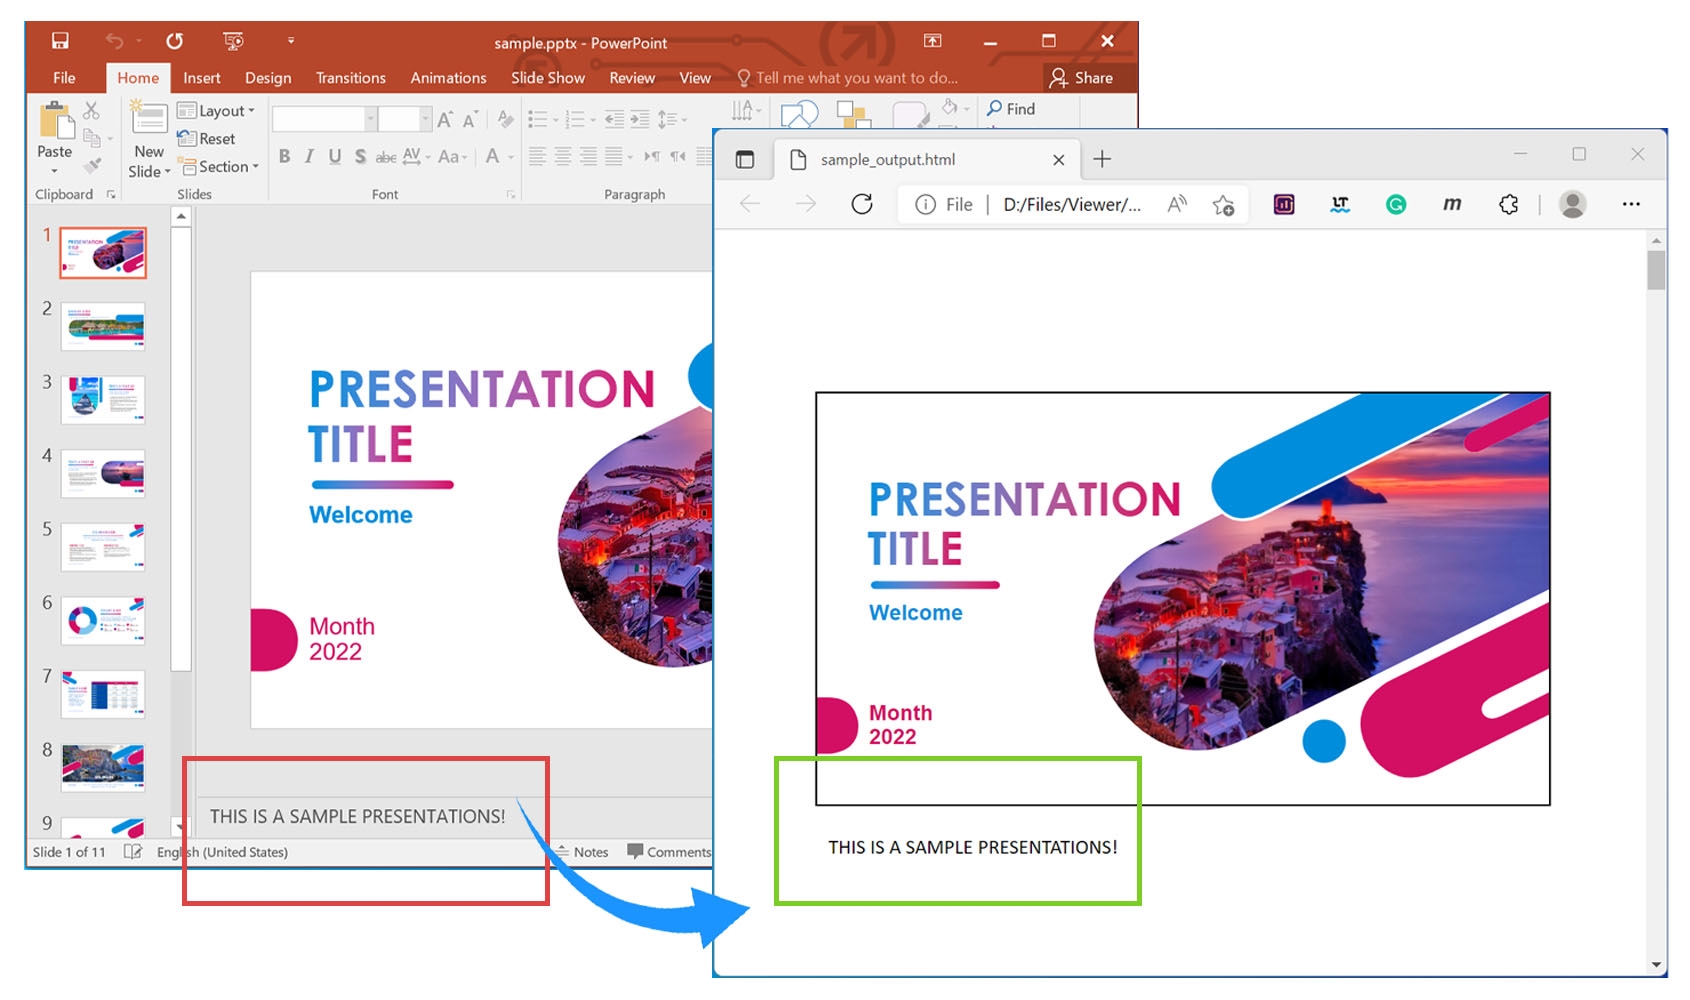 Render PowerPoint Presentation Notes in HTML using C#.